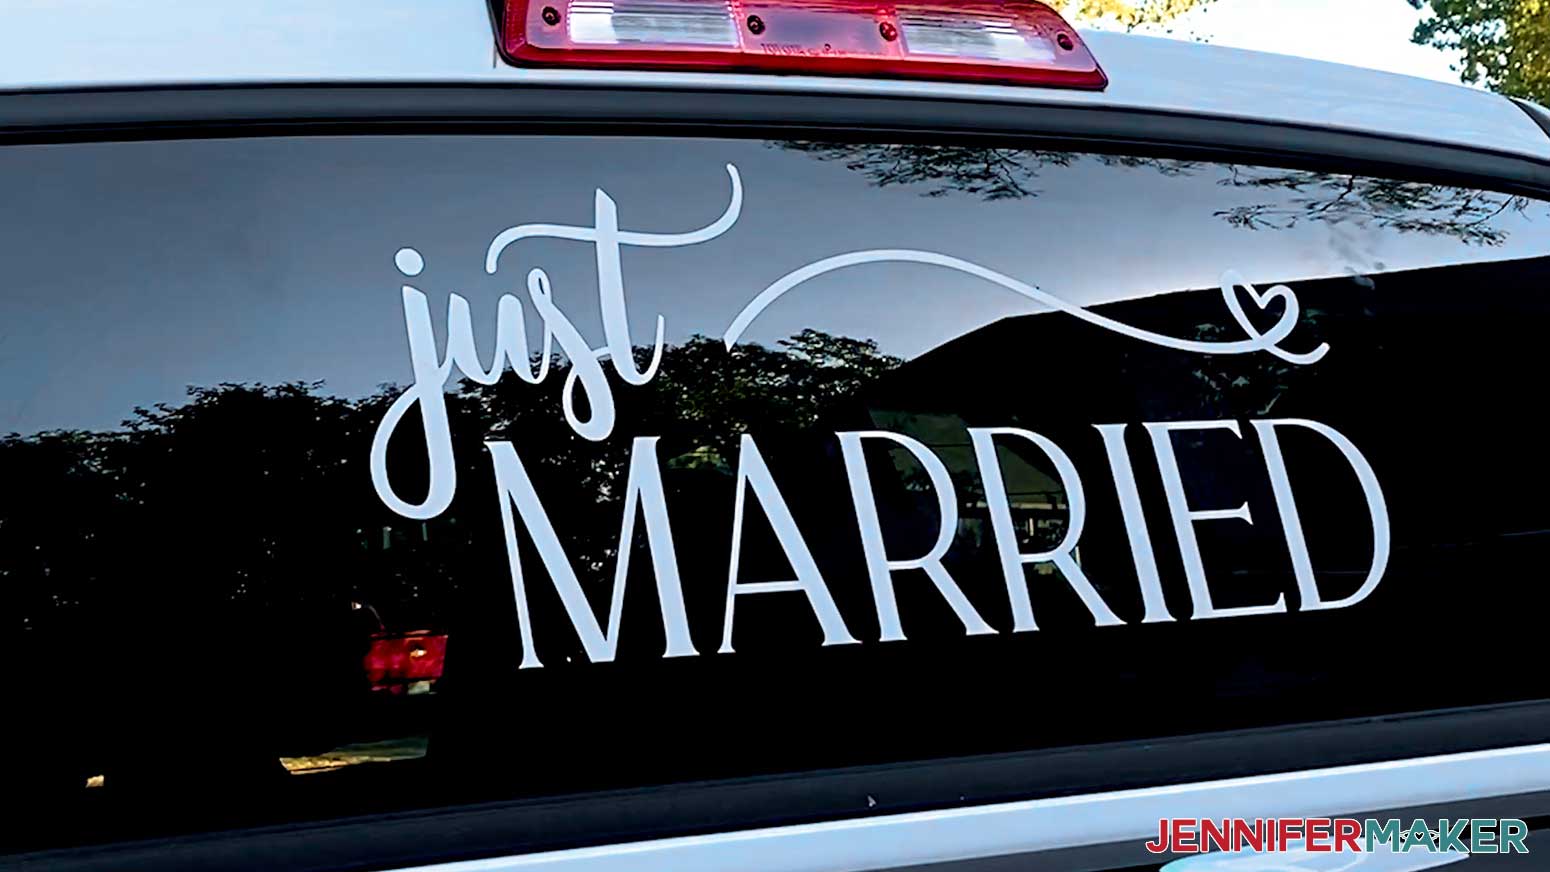 Just Married #2 customized decal on vehicle window